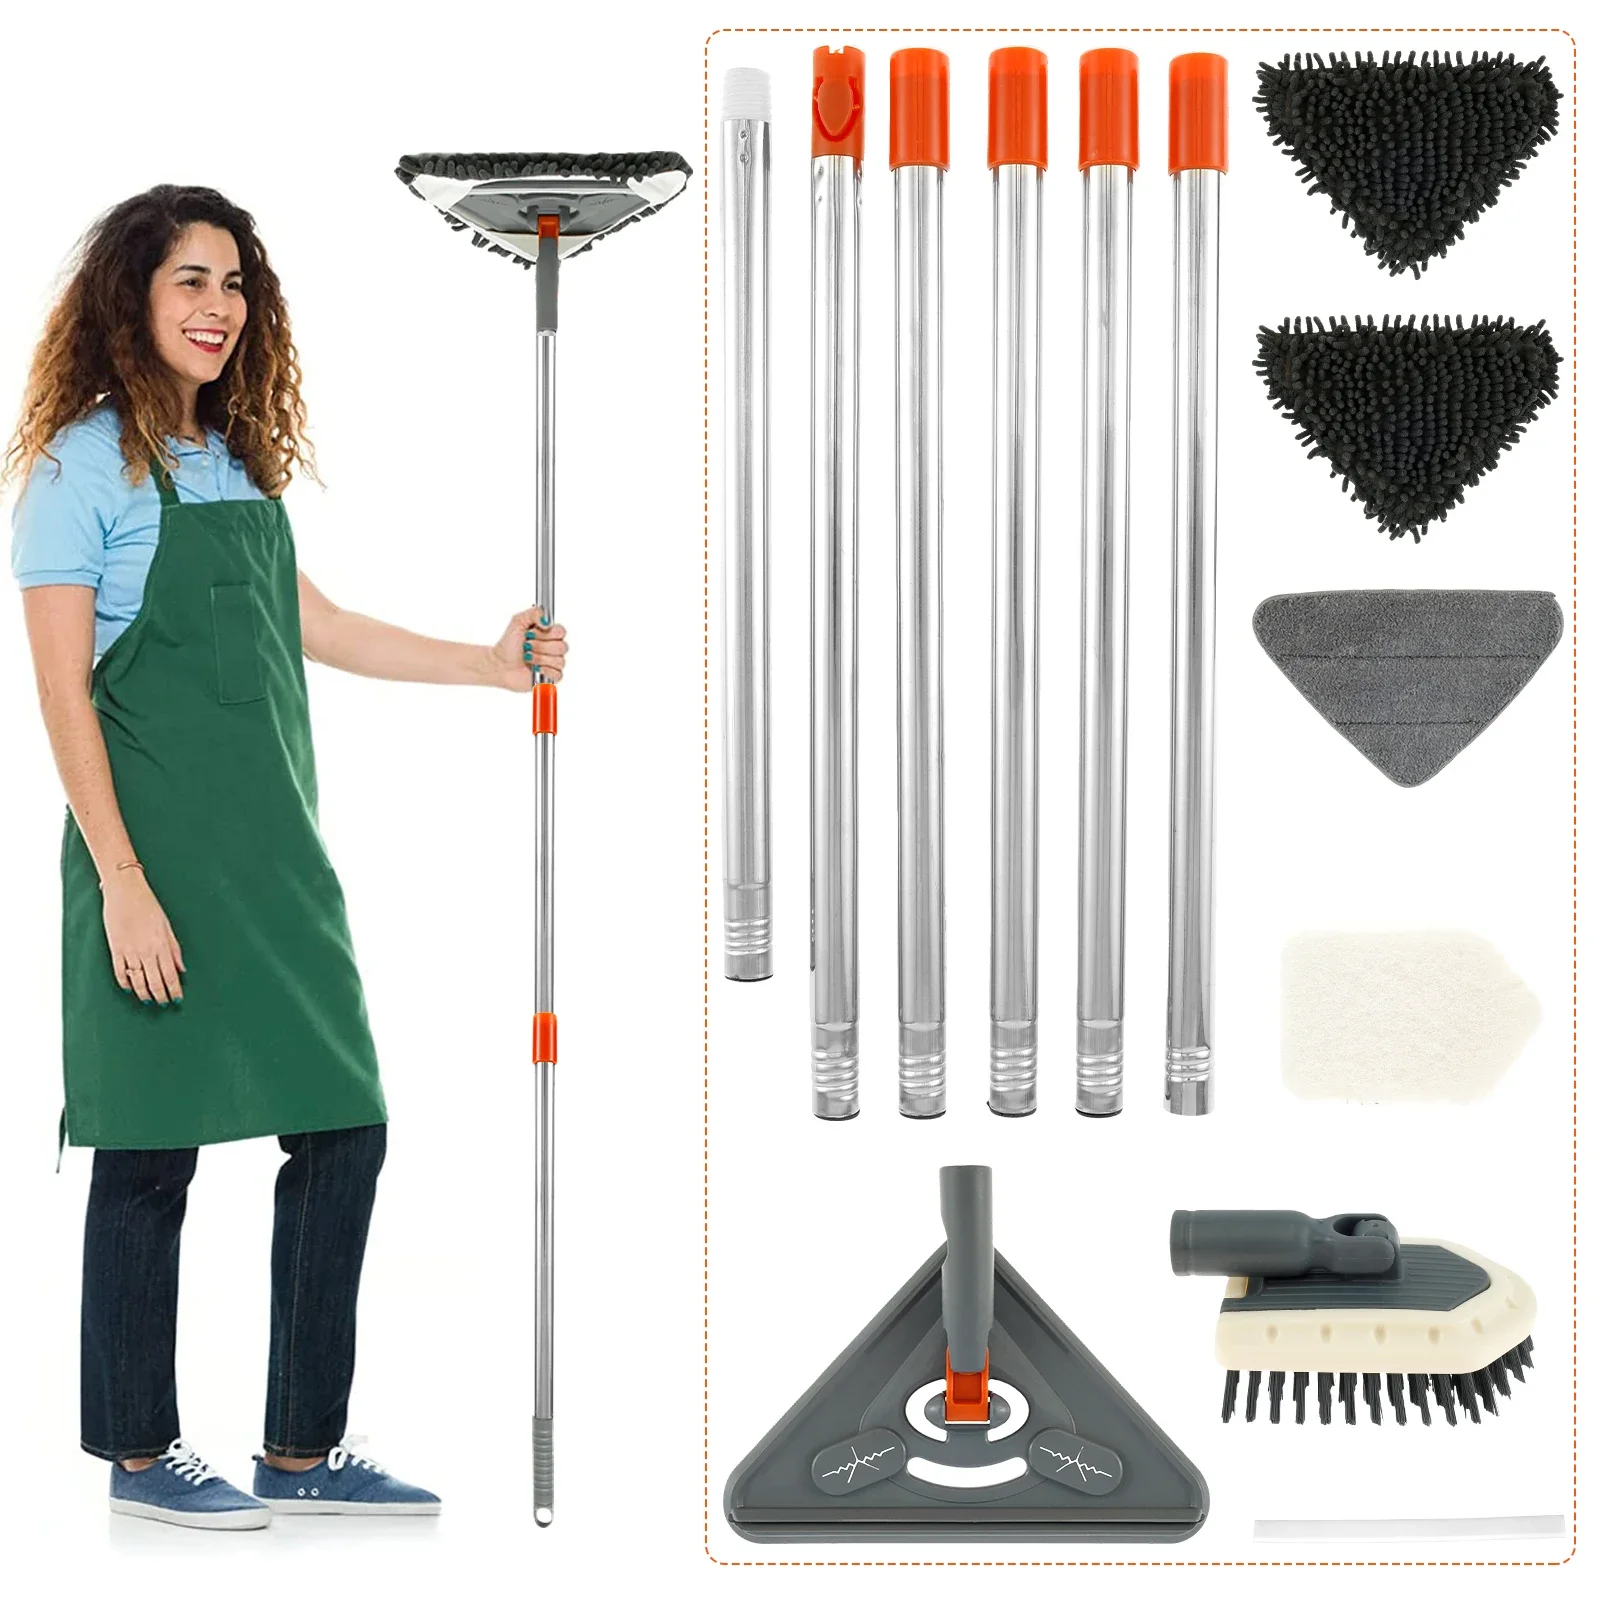 https://ae01.alicdn.com/kf/S2ceae17bc8934e5fbc07e97efb66e112N/Wall-Cleaner-Mop-with-Long-Handle-360-Rotating-Triangle-Cleaner-Mop-Adjustable-Dry-and-Wet-Household.jpg